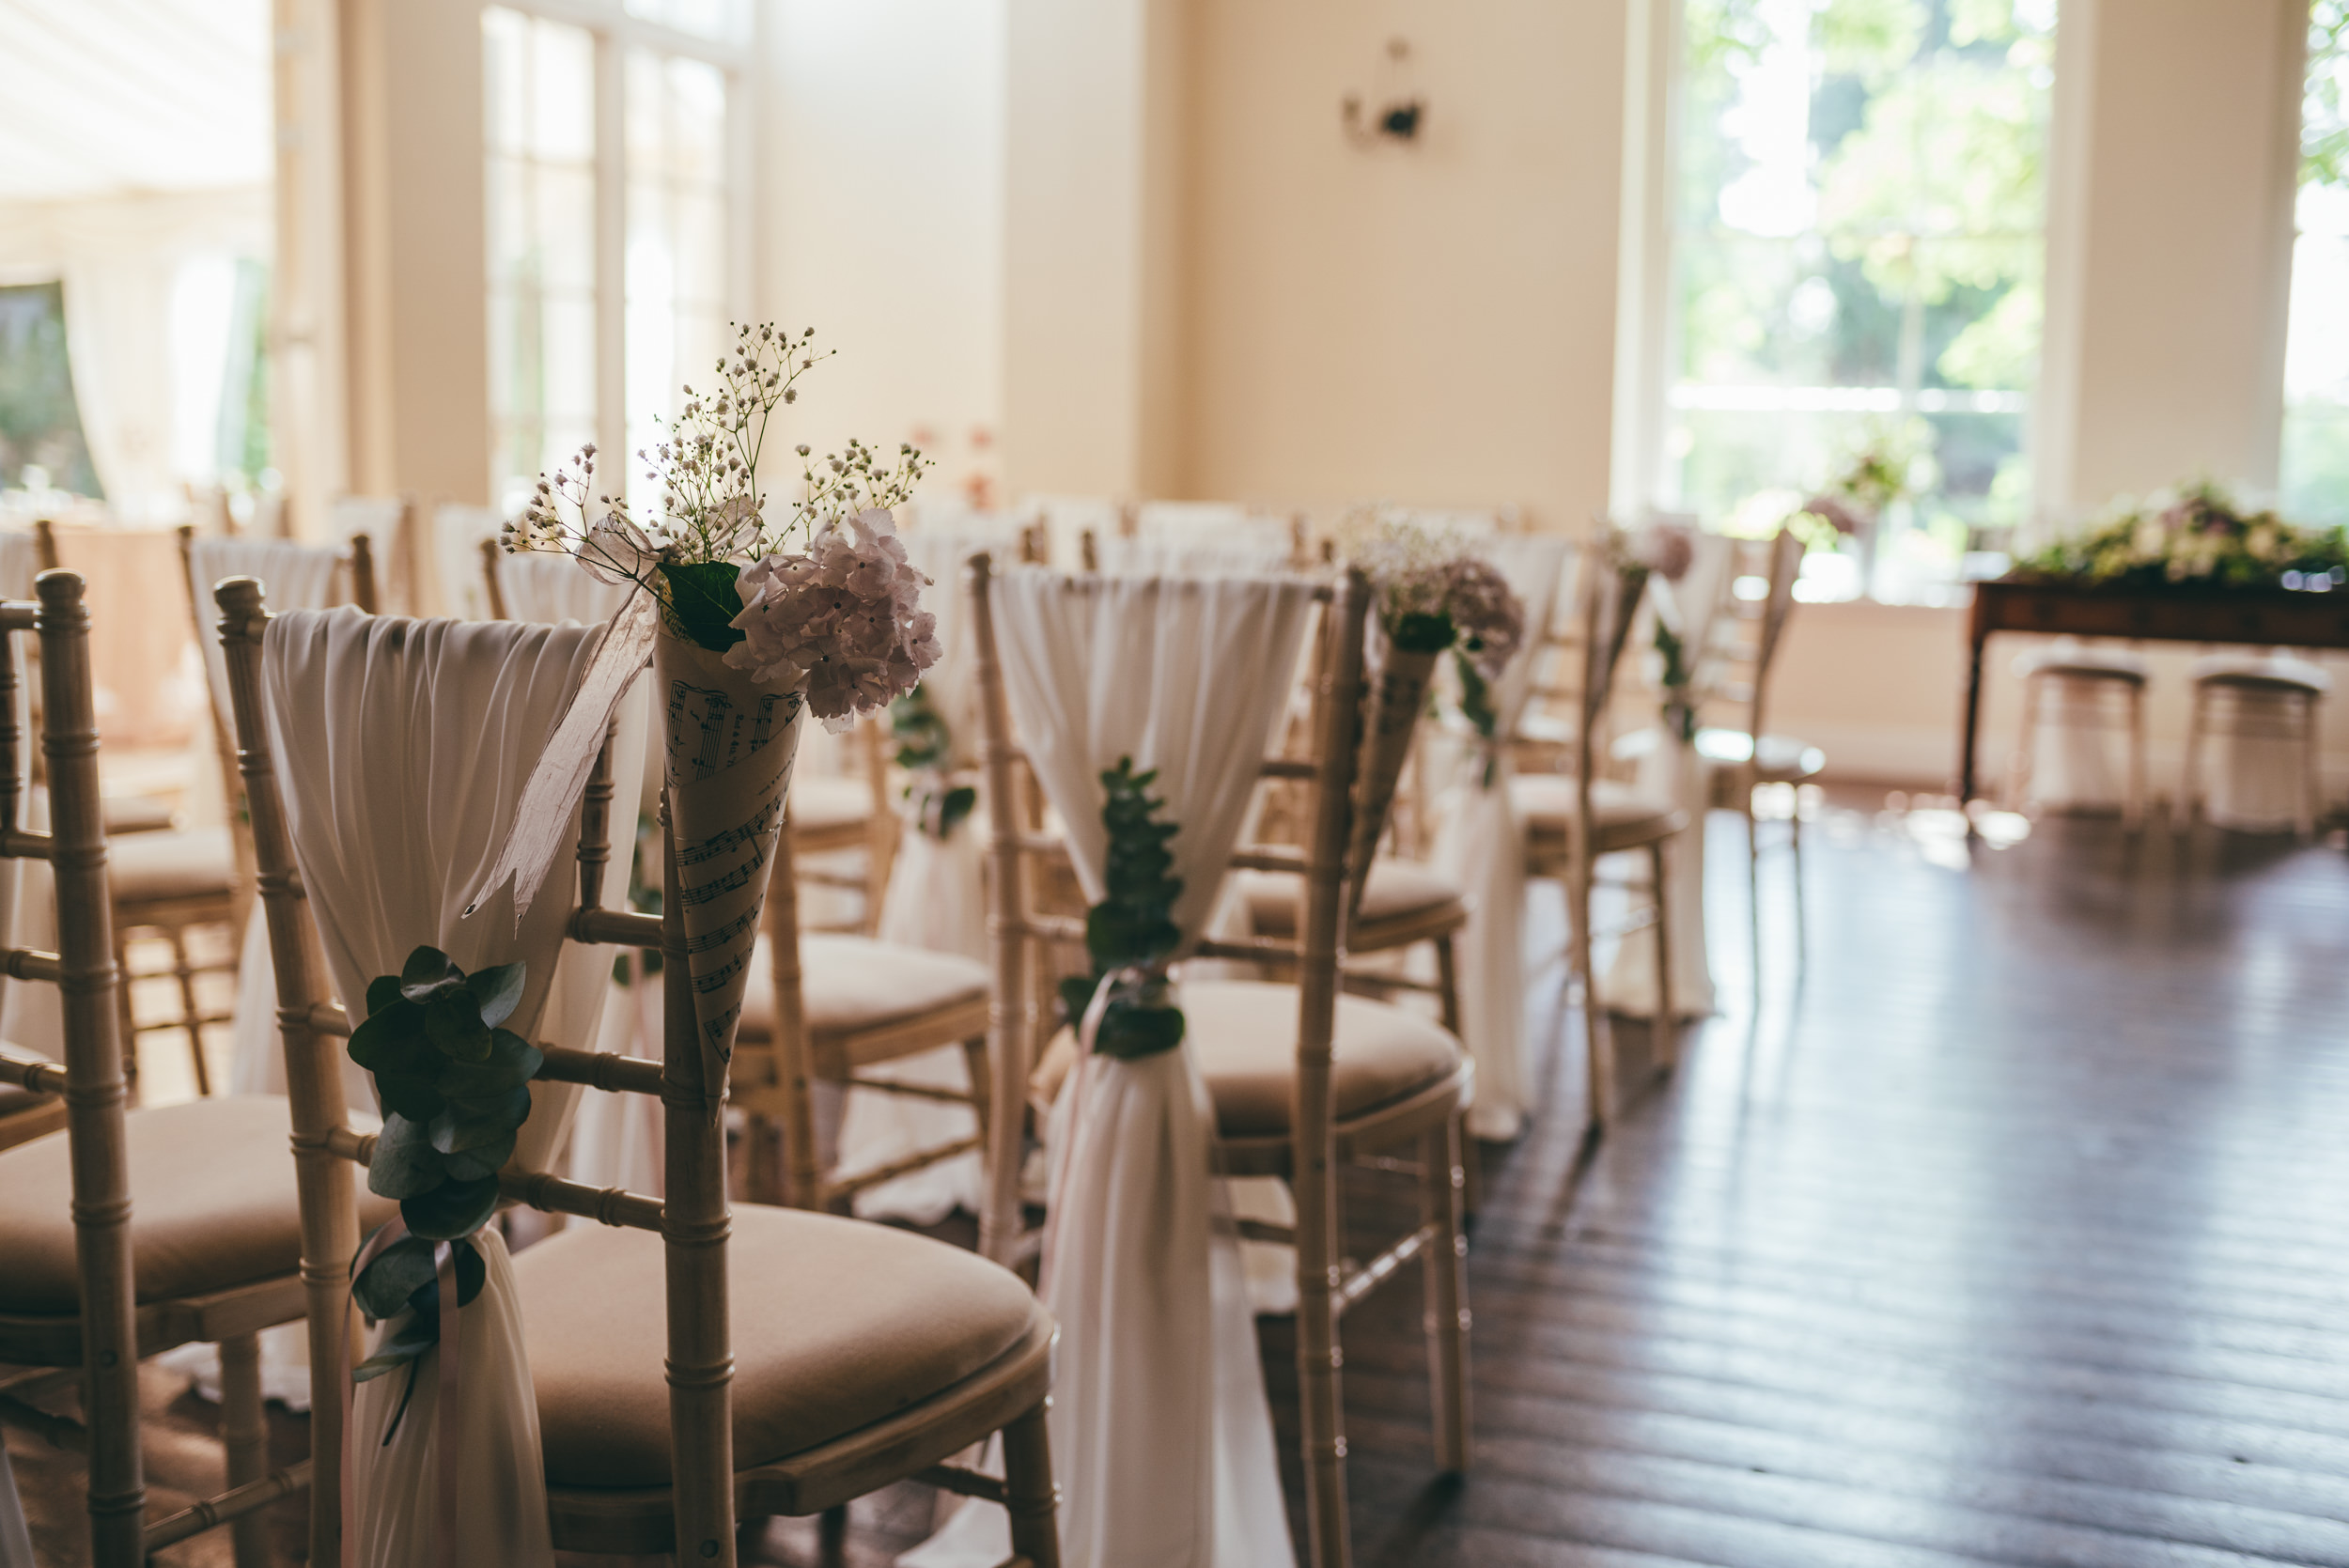 sashes on the chairs at Yeldersley Hall